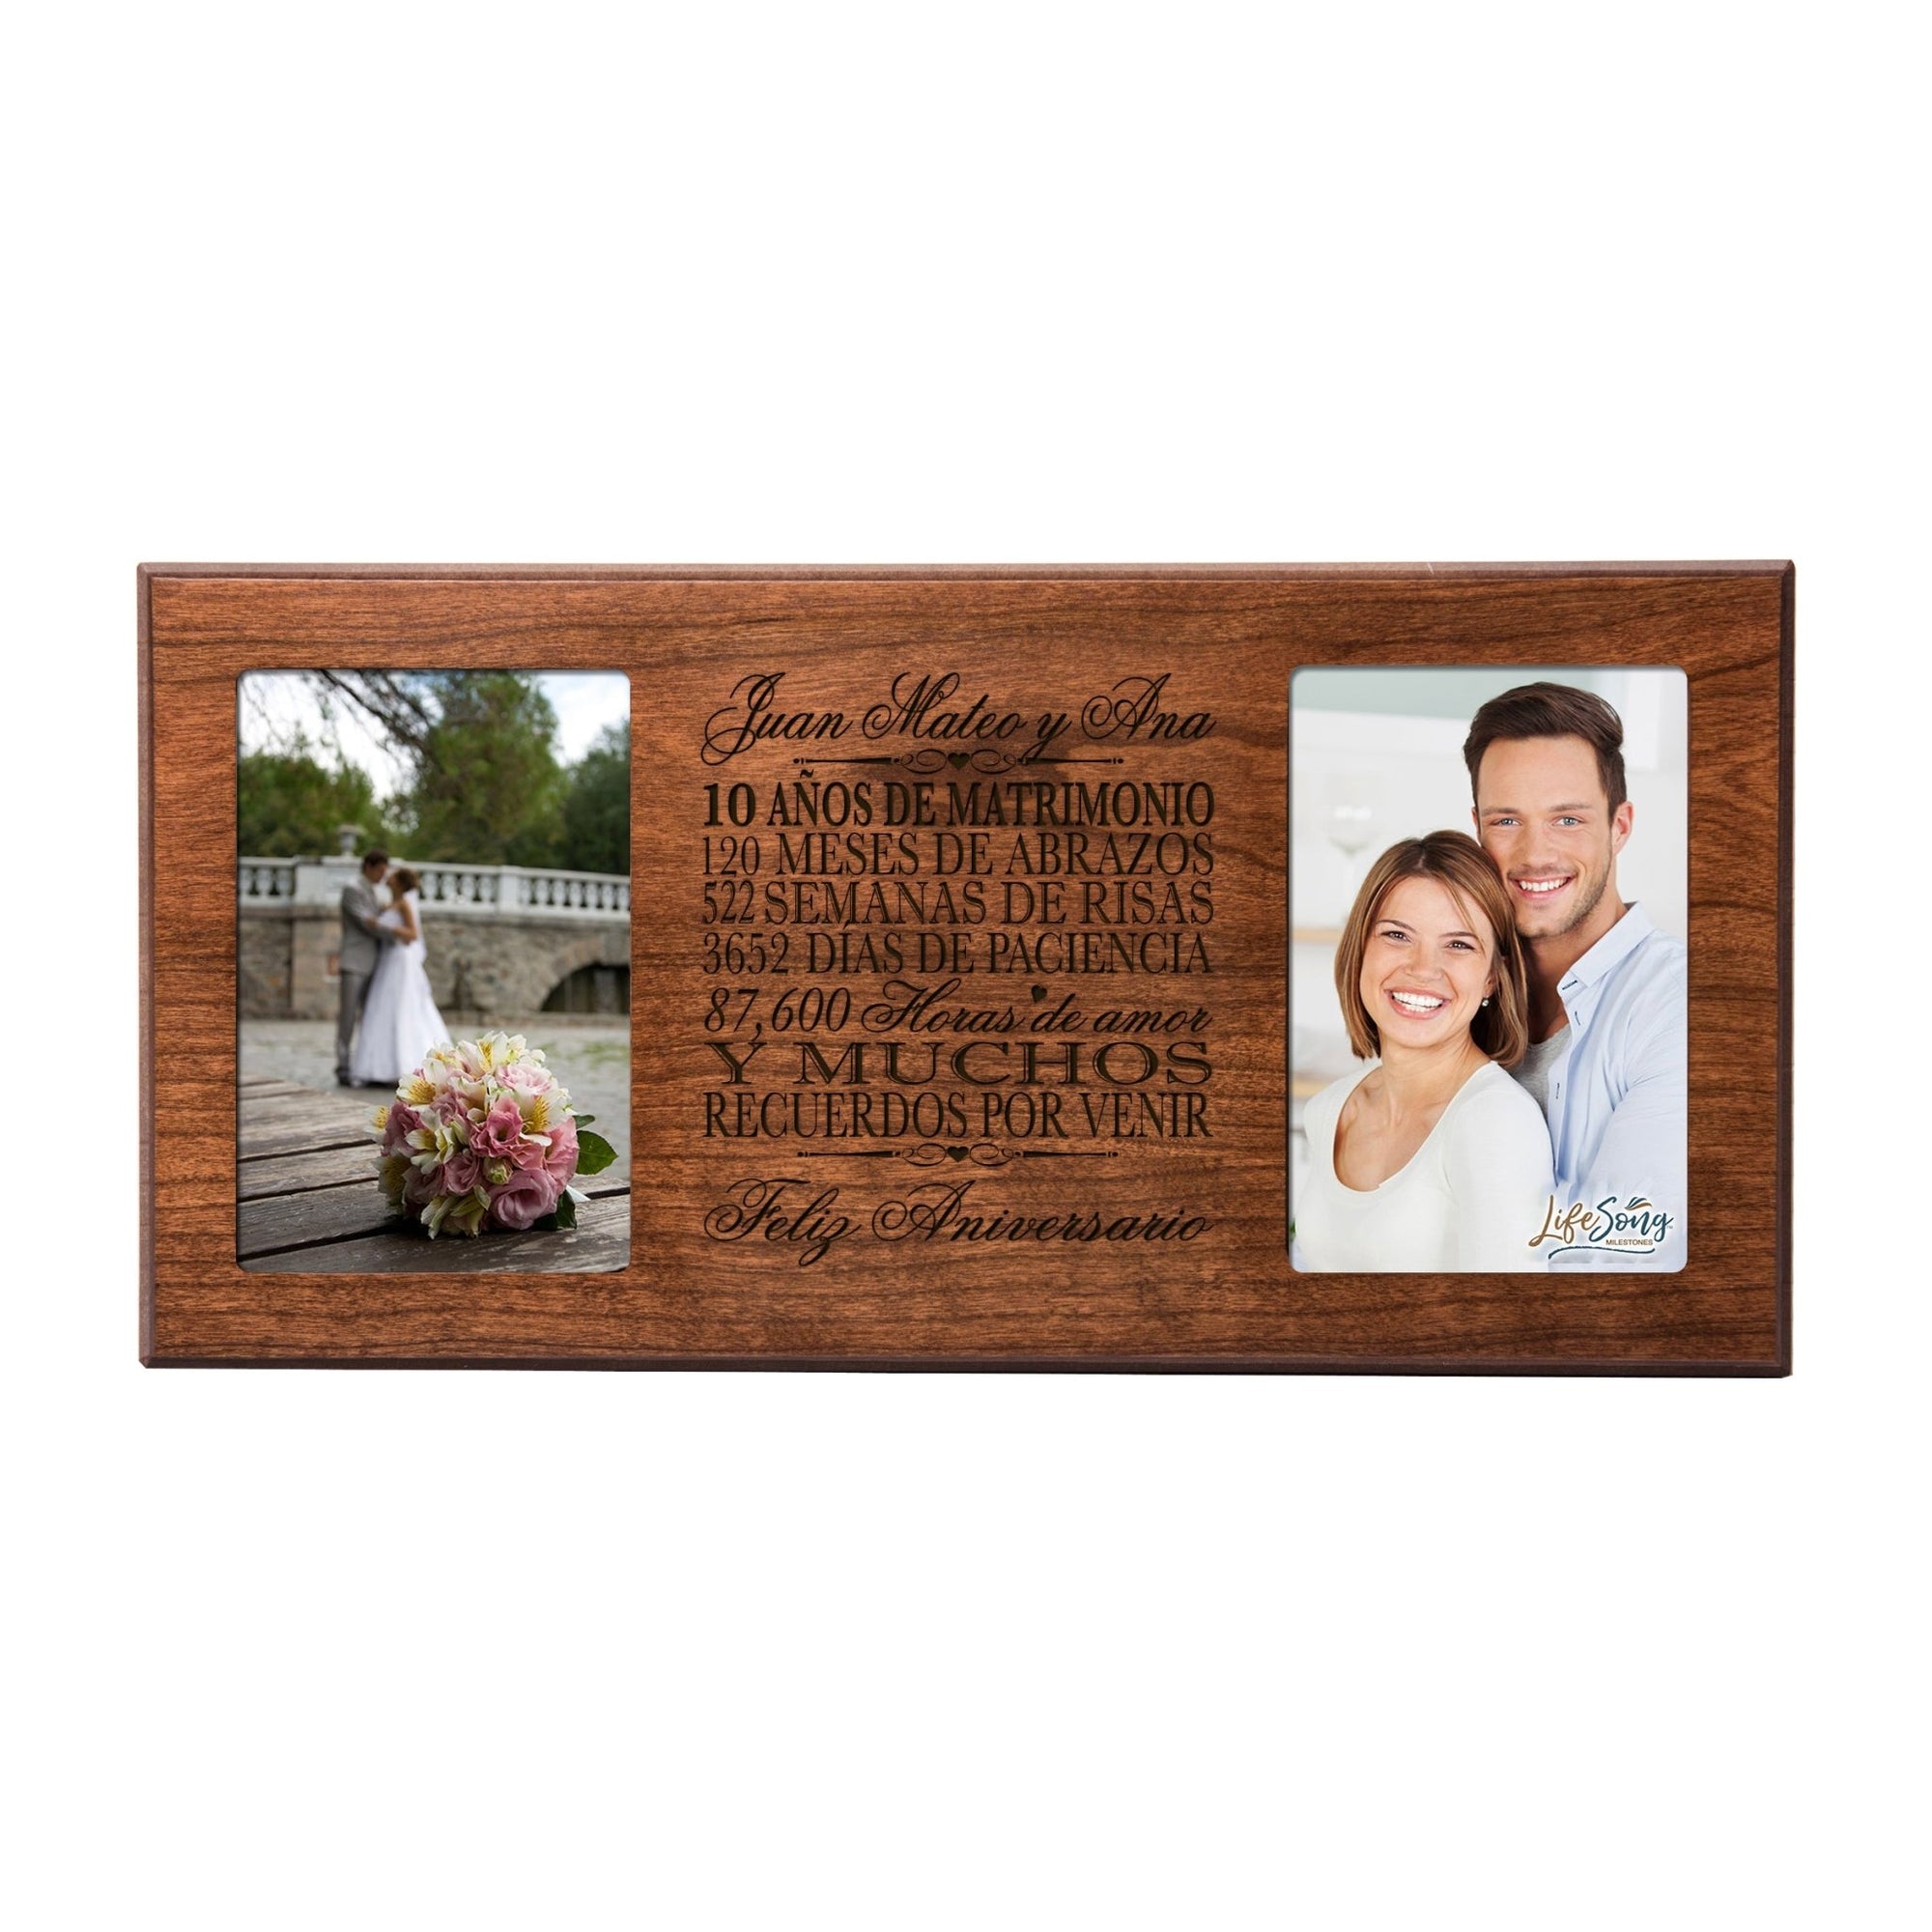 Lifesong Milestones Personalized 10th Wedding Anniversary Spanish Picture Frame